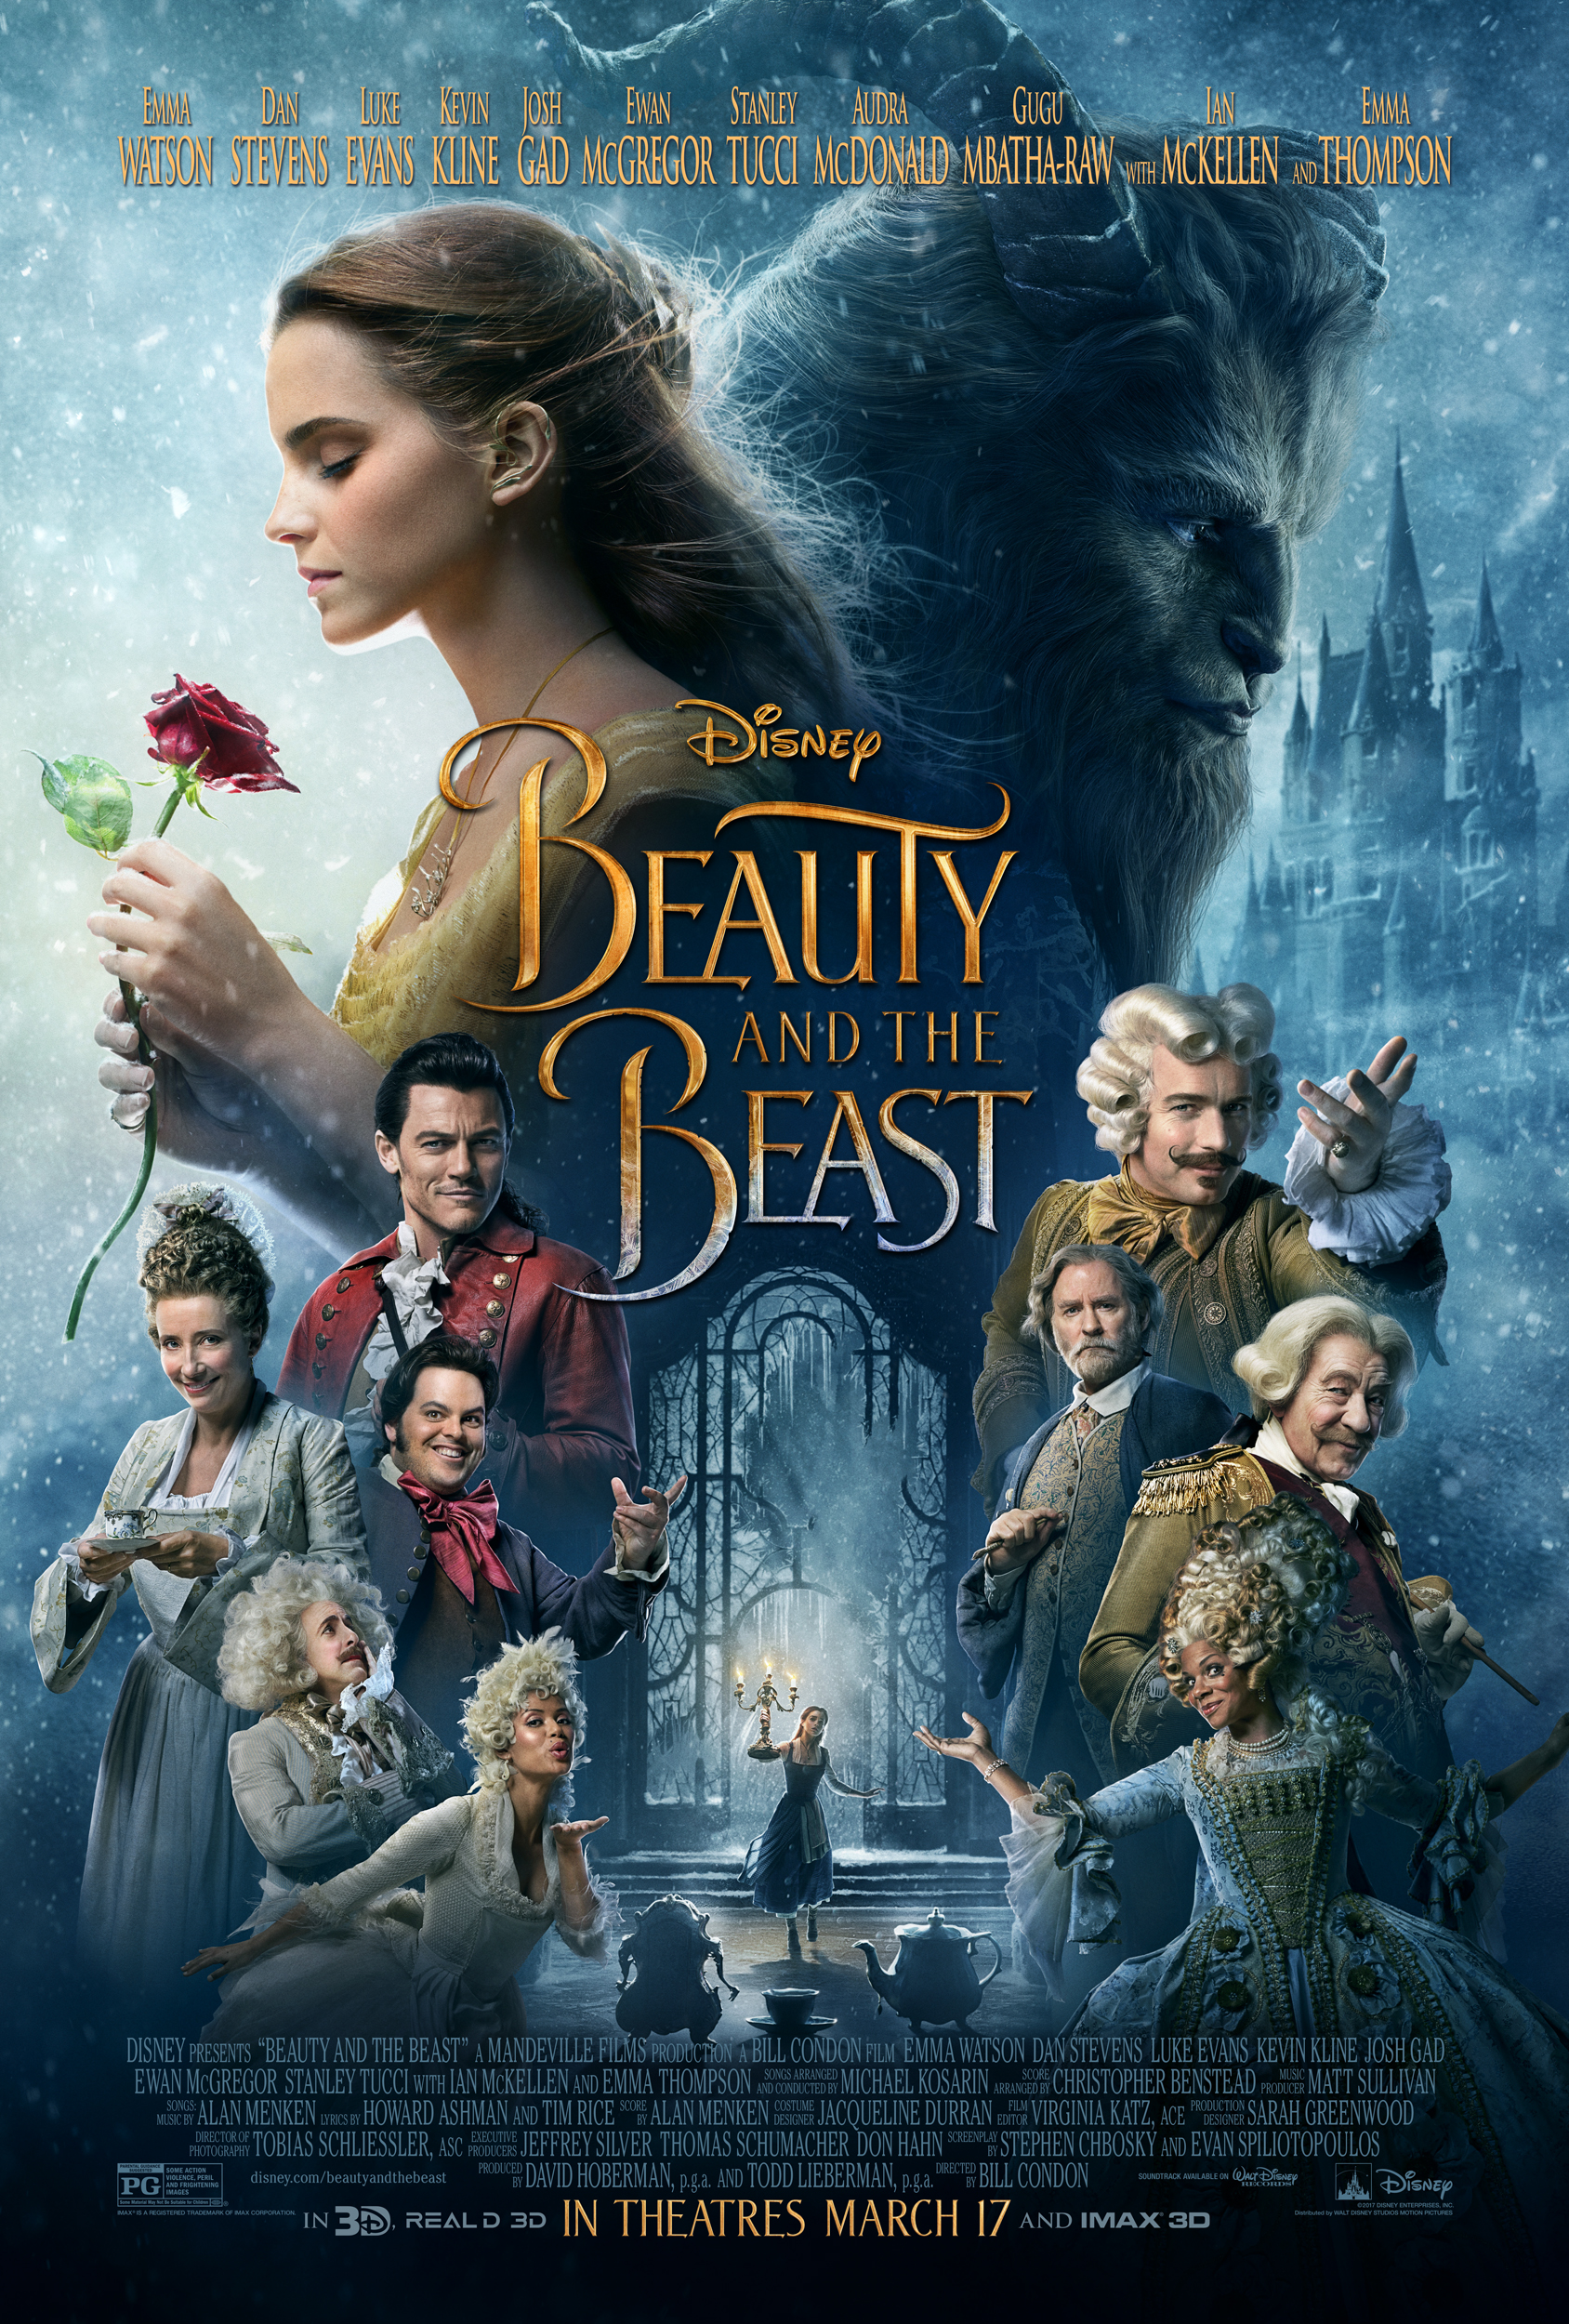 BEAUTY AND THE BEAST Advance Screening tickets